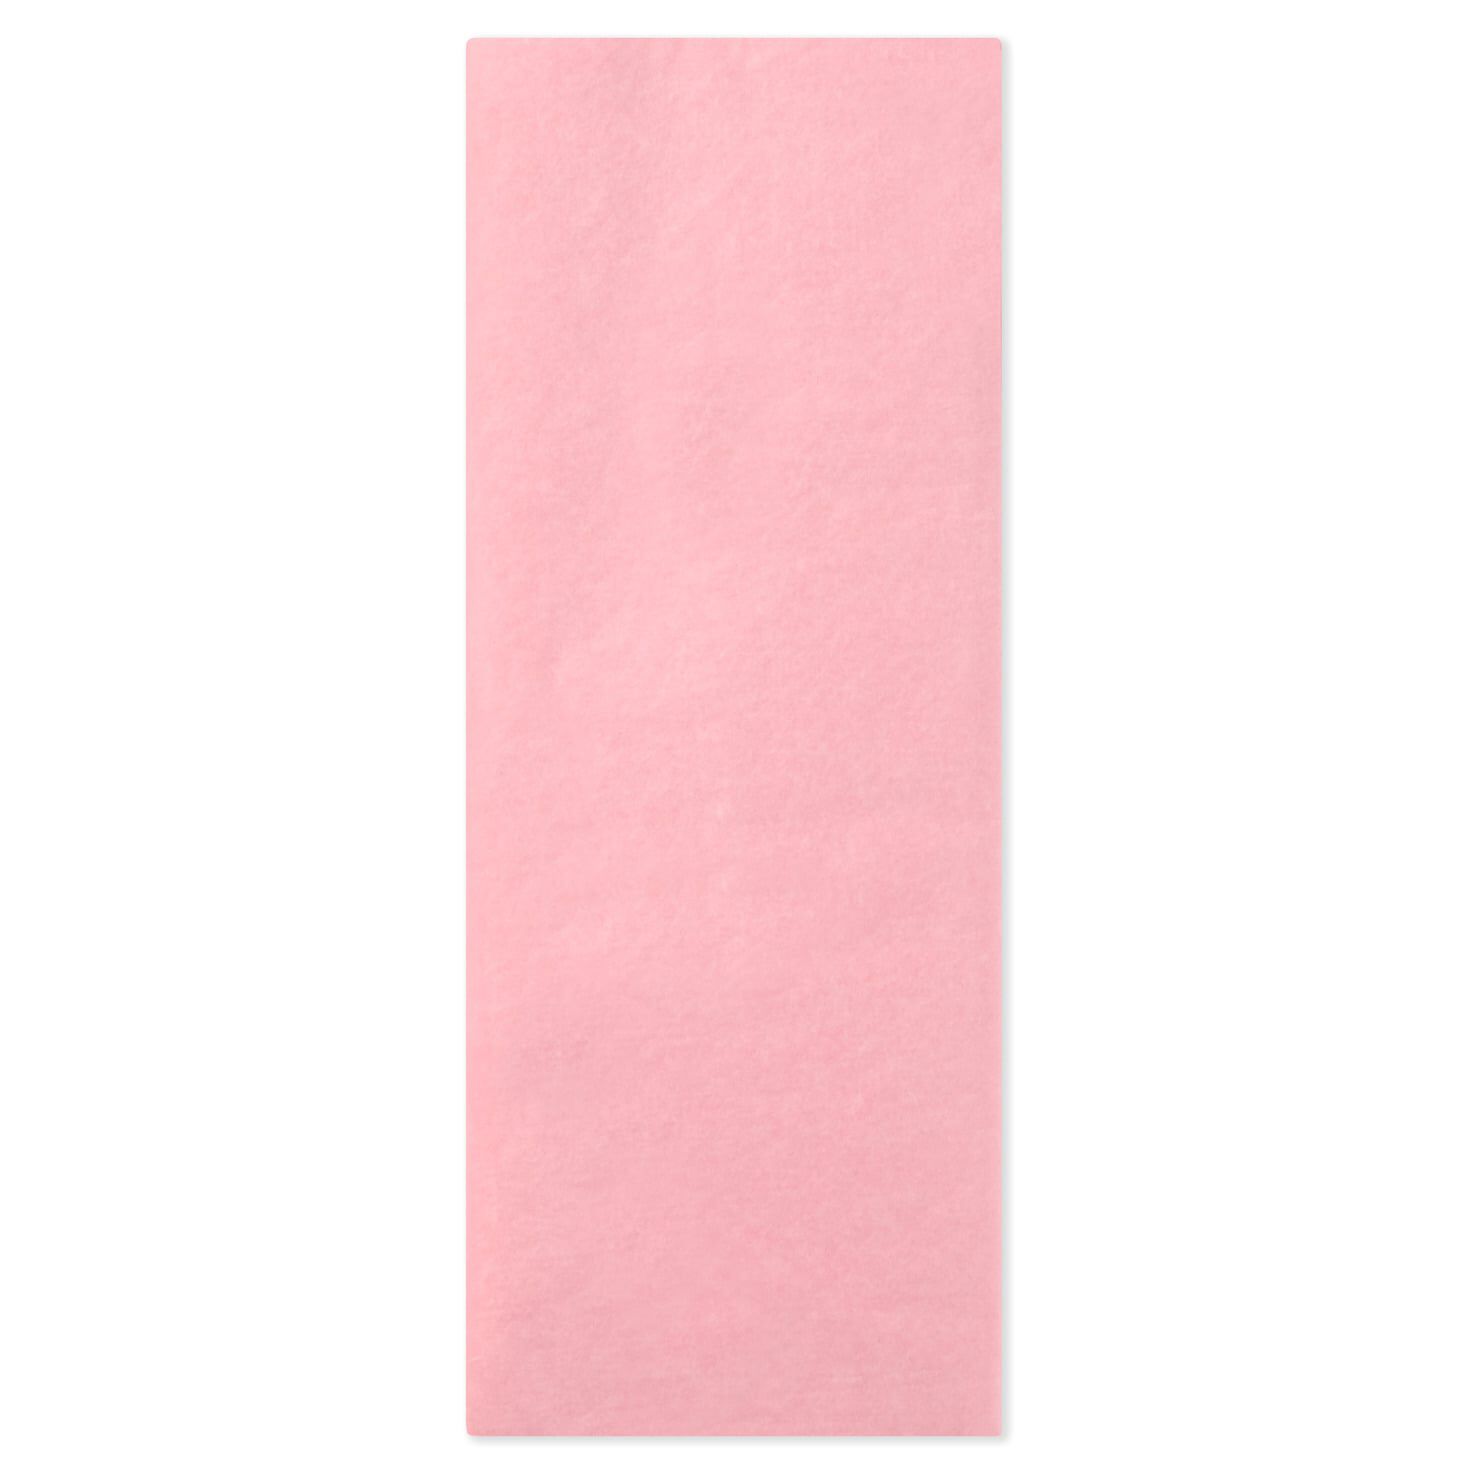 Pink Tissue Paper, 8 sheets for only USD 1.99 | Hallmark